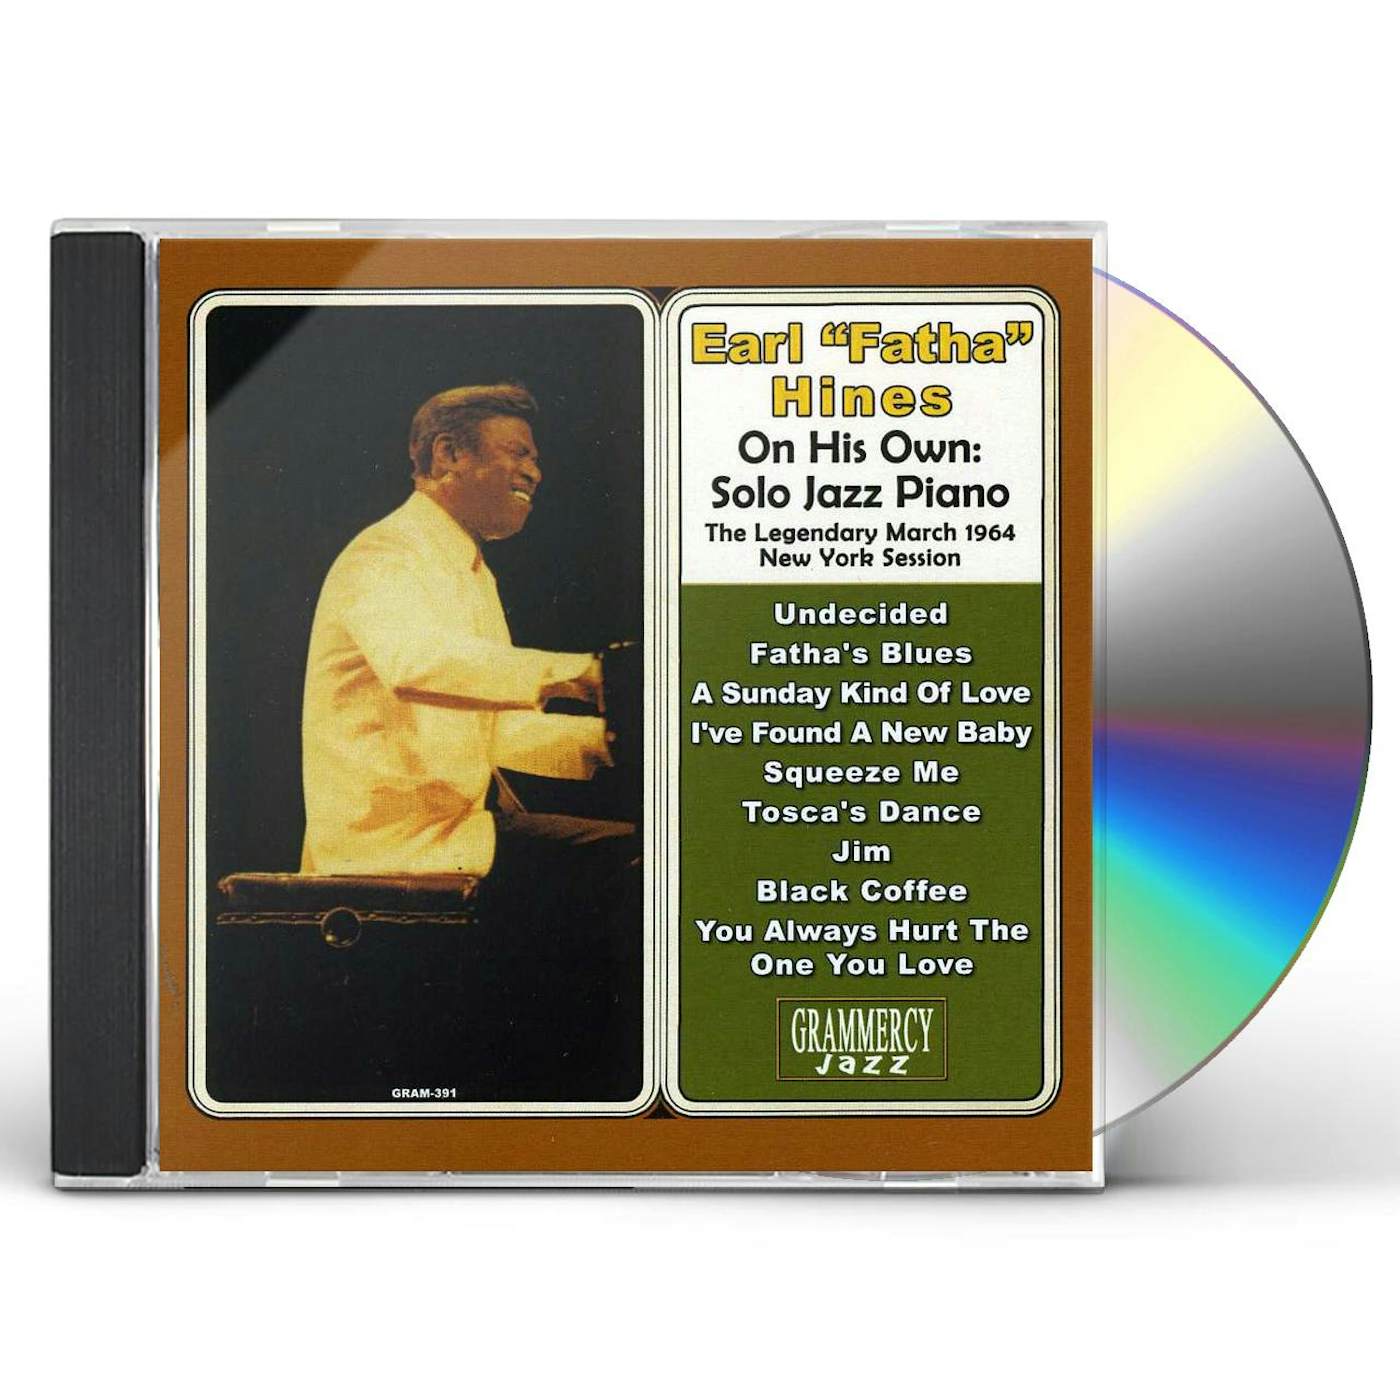 Earl Hines ON HIS OWN: SOLO JAZZ PIANO CD